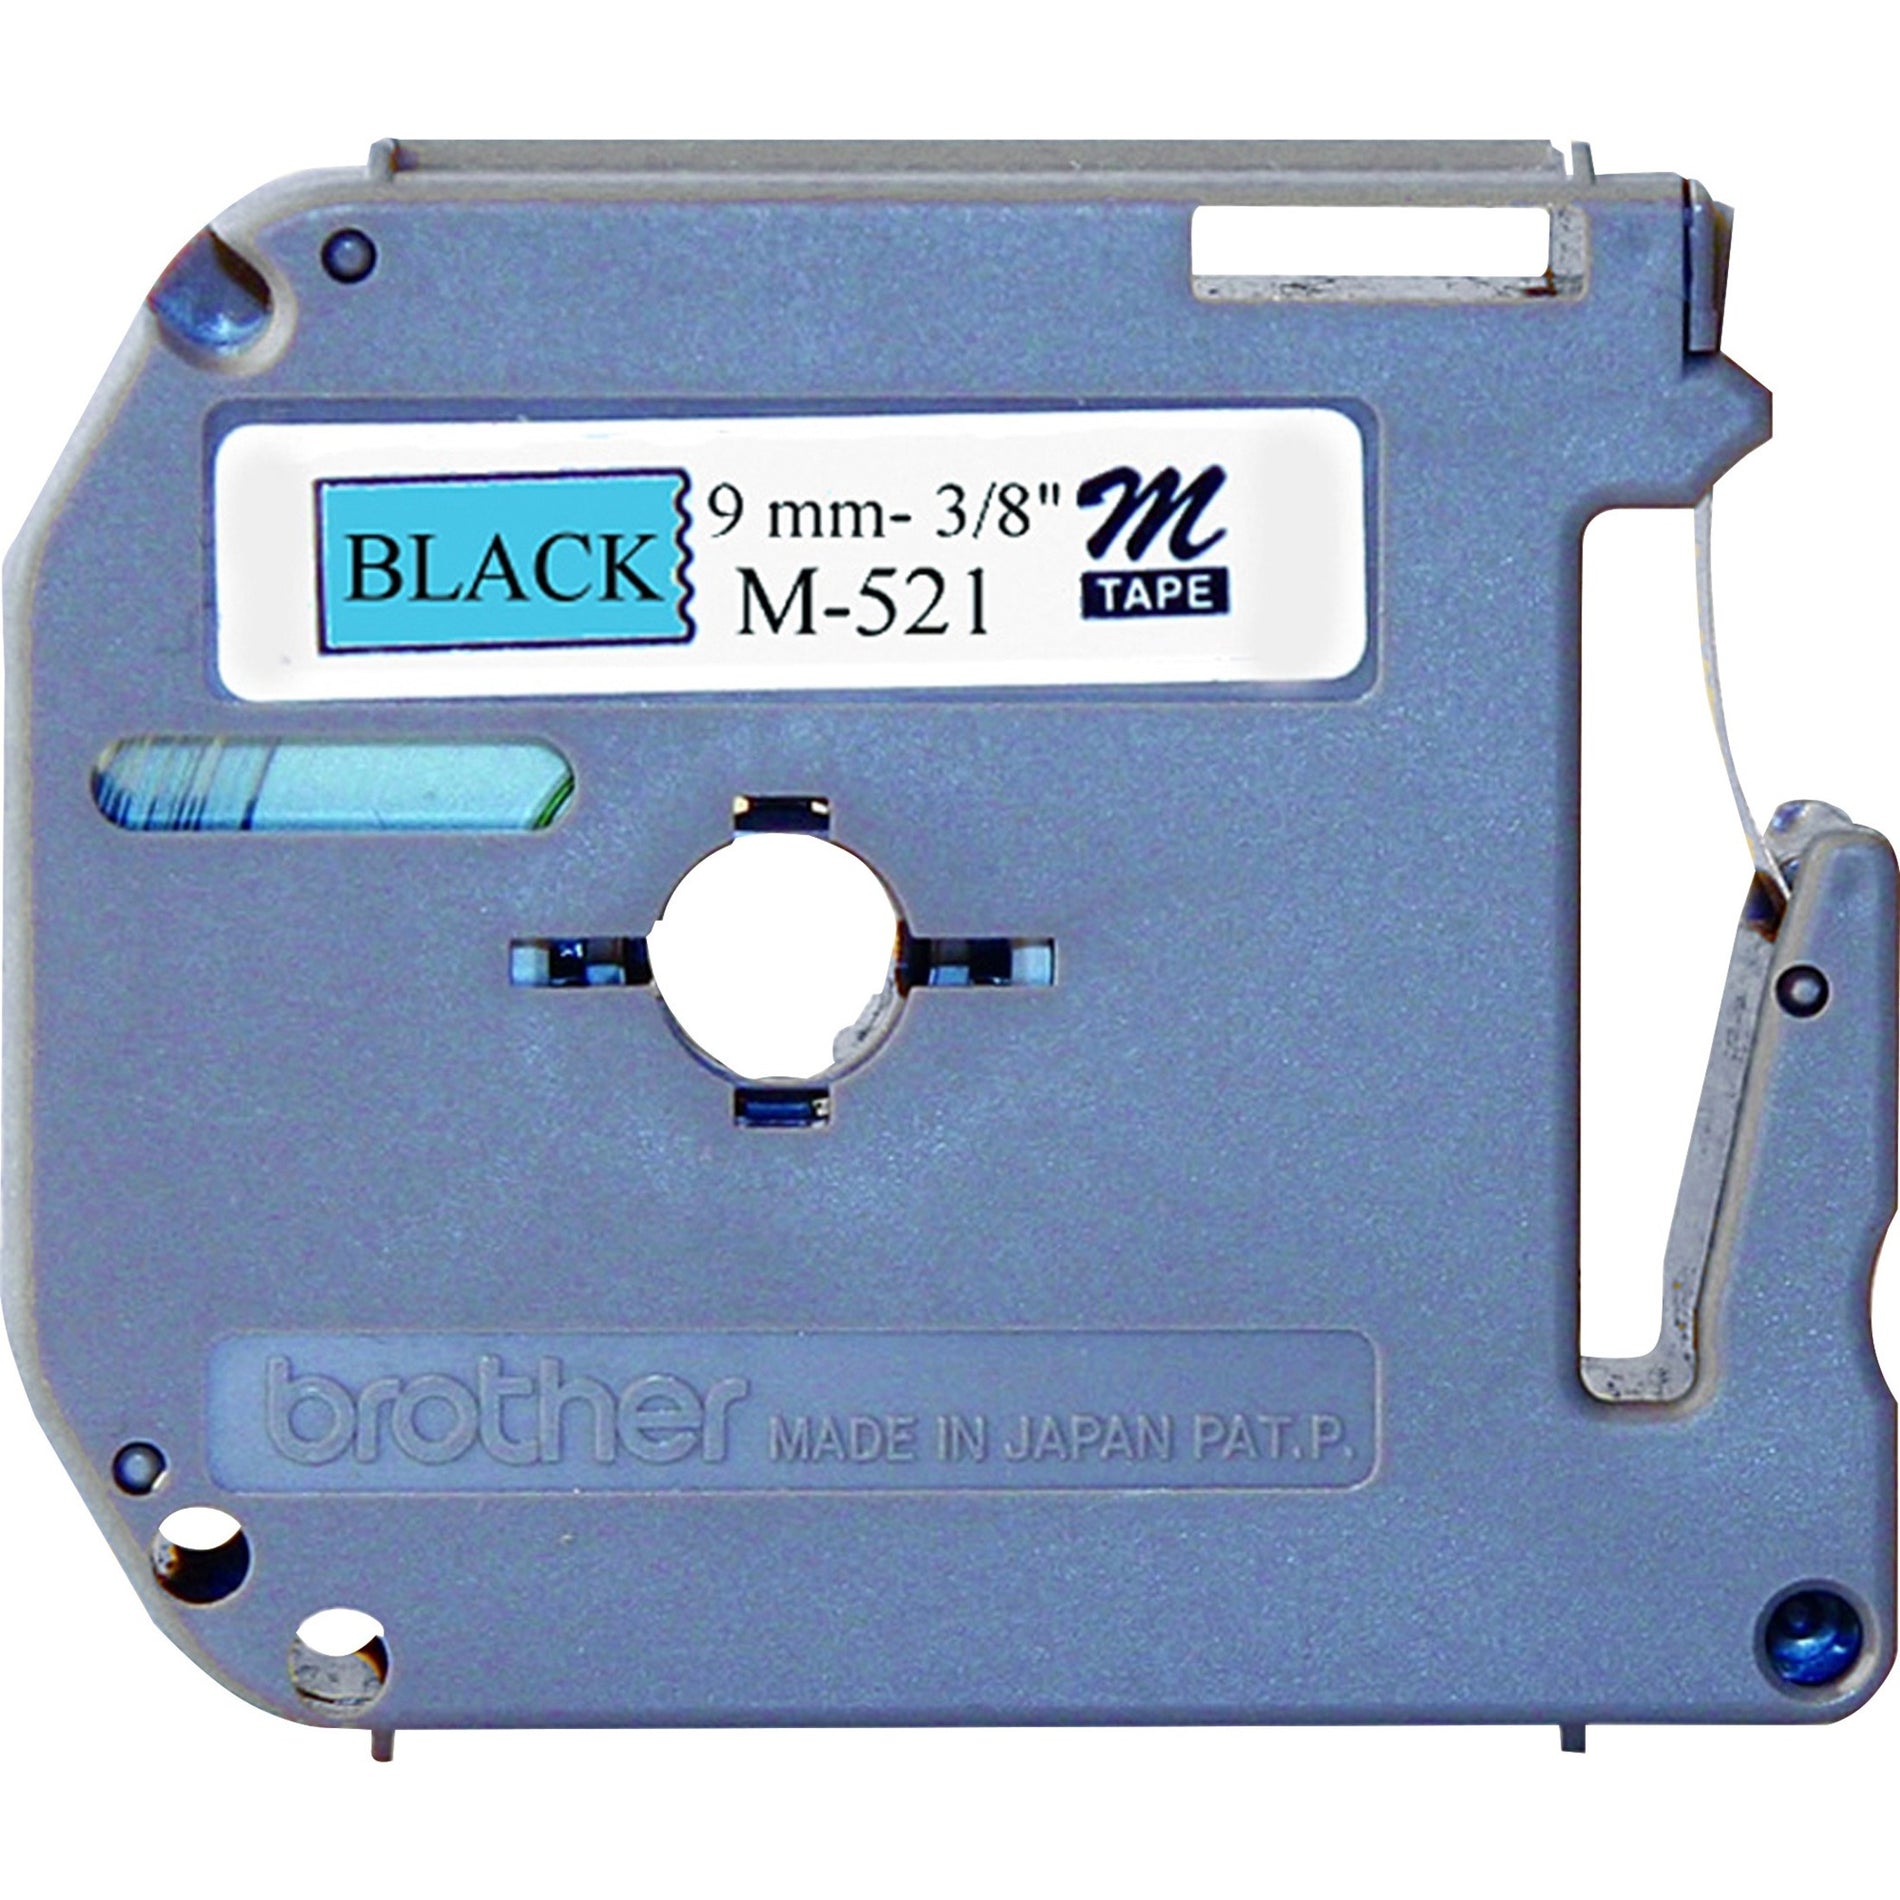 Brother M521 P-touch Nonlaminated Label Tape, 3/8" Size, Black/Blue